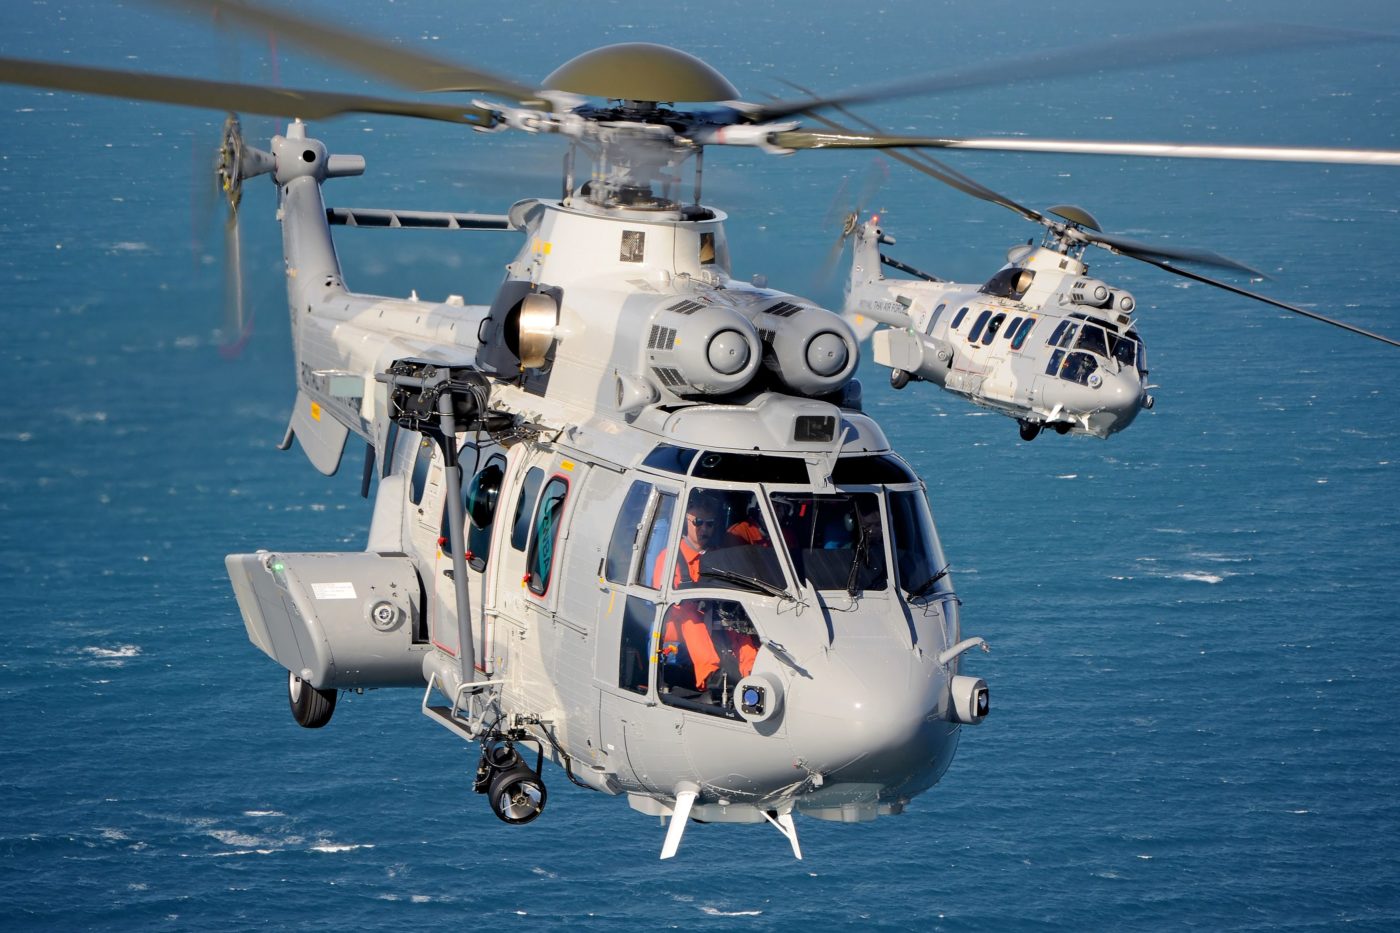 The new purchase brings the RTAF’s H225M fleet to 12 units. Anthony Pecchi Photo